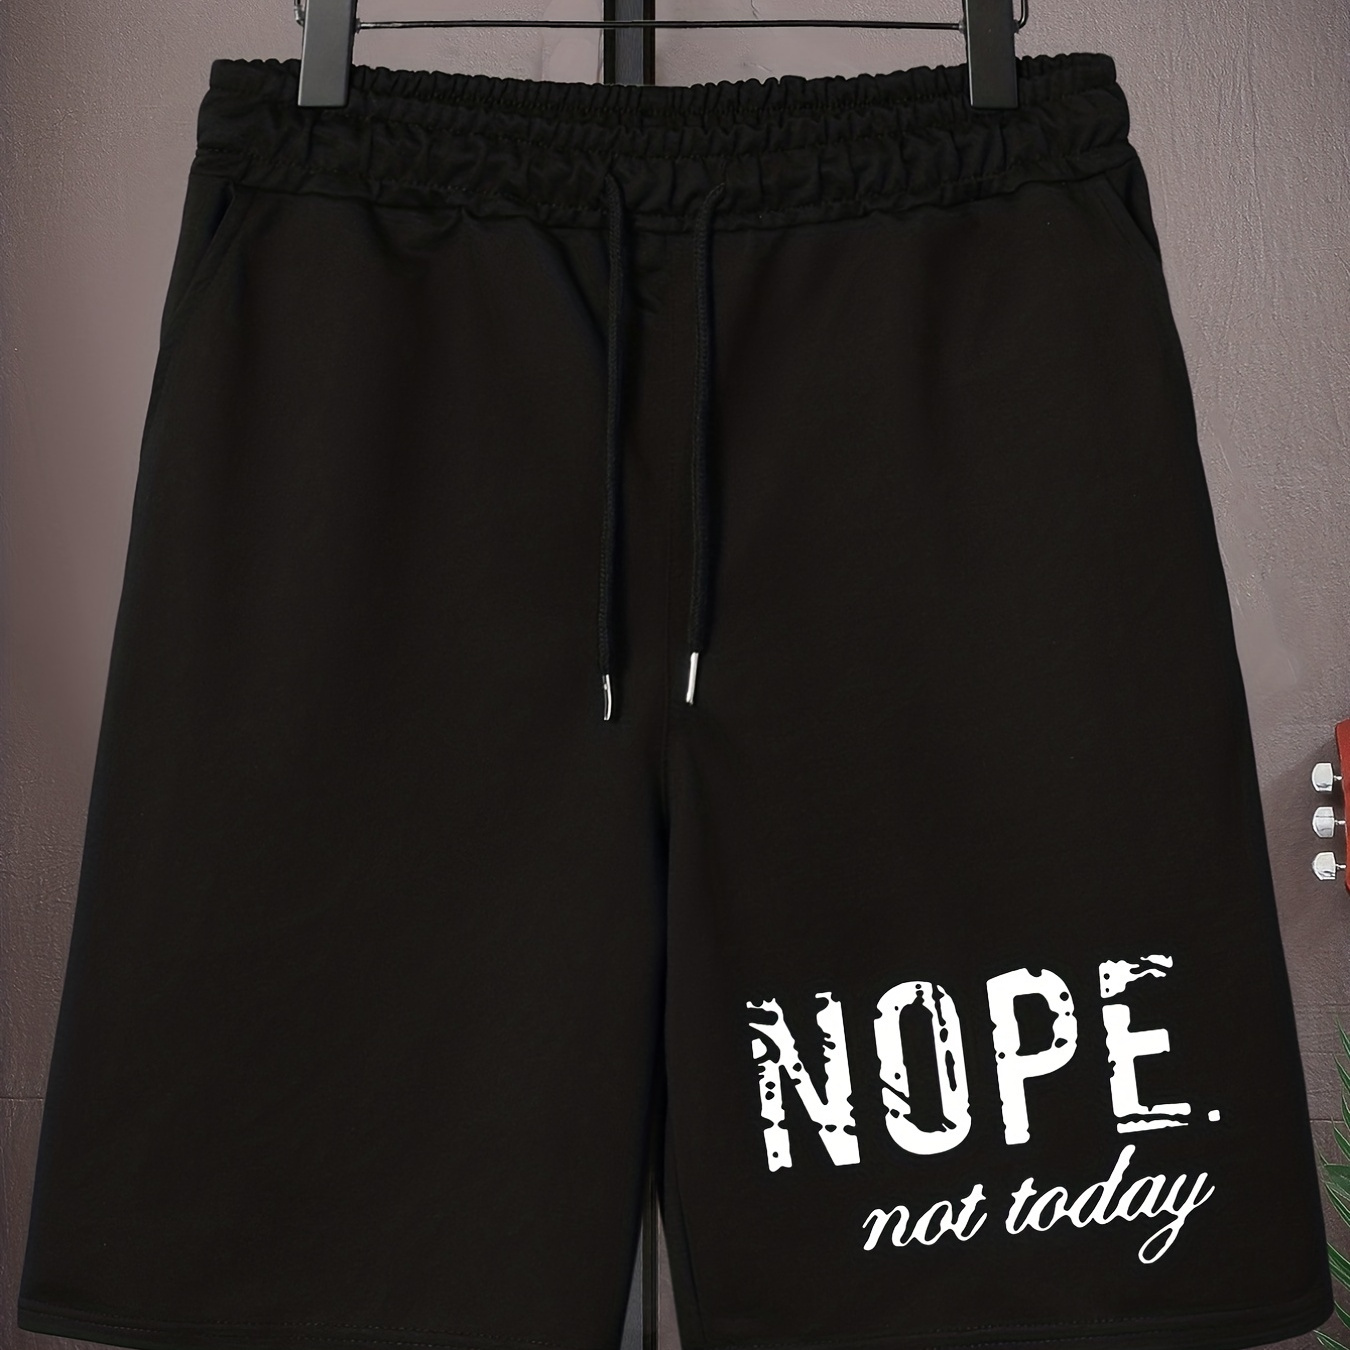 

Men's Plus Size Drawstring Shorts, ''nope Not Today'' Print Oversized Elastic Short Sports Pants For Big And Tall Guys, Spring & Summer Wear